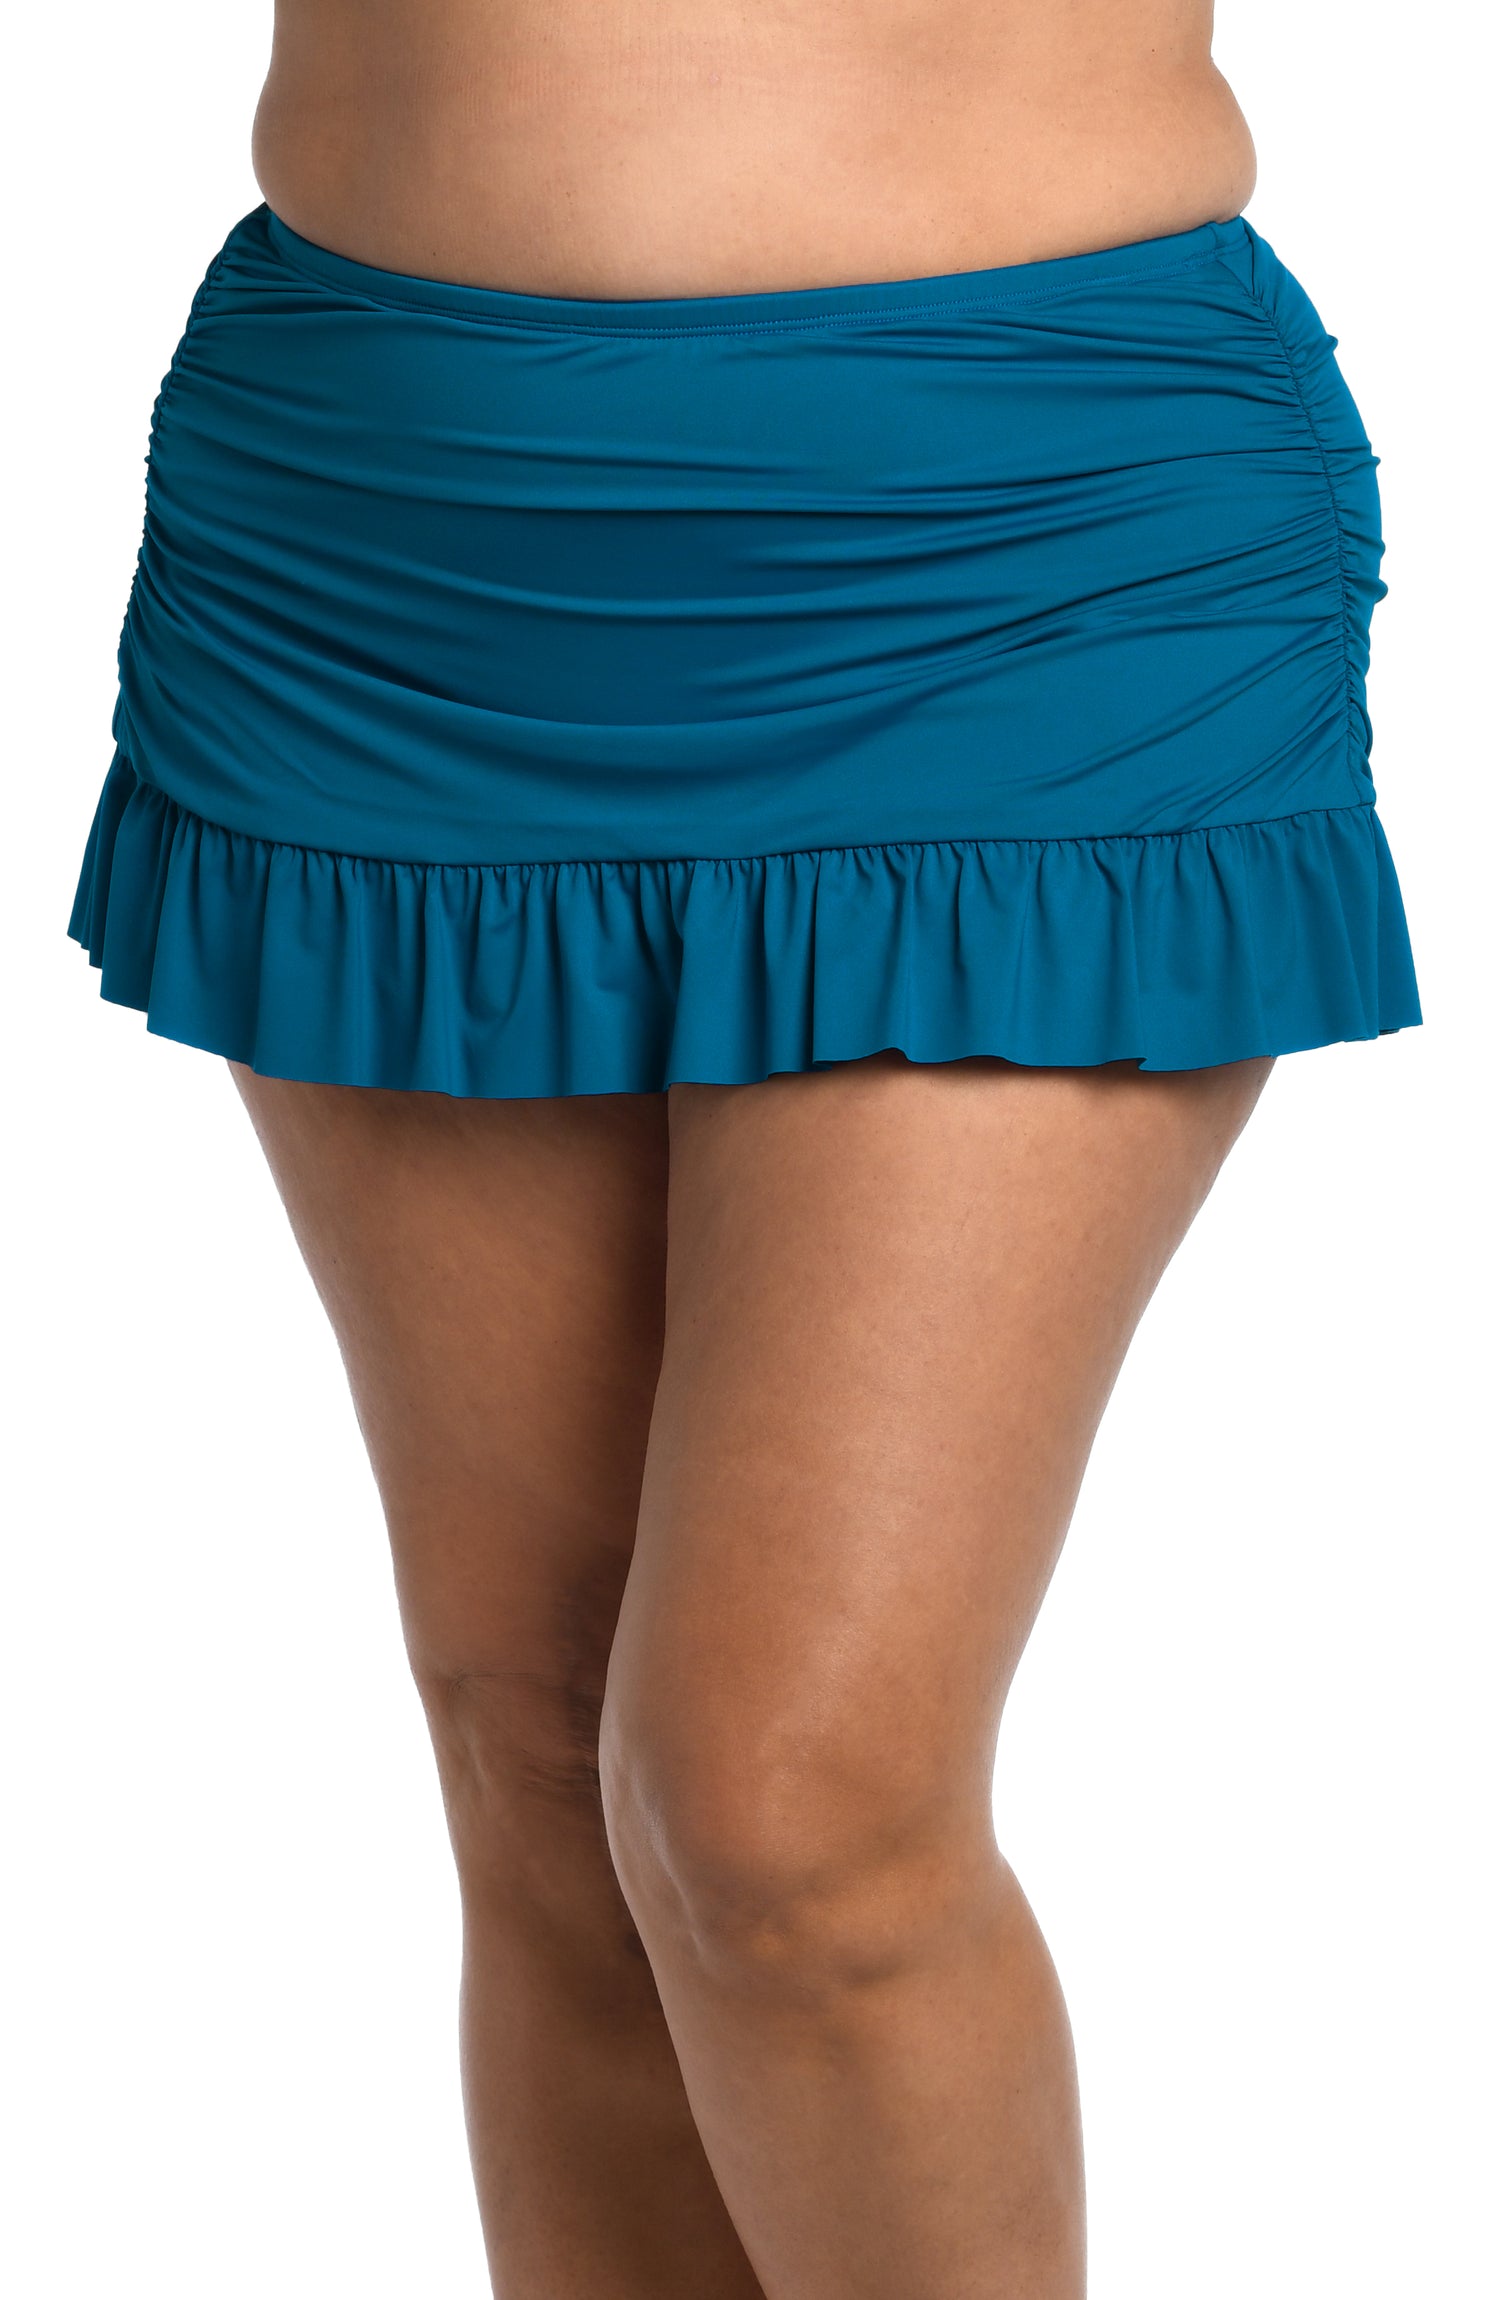 Model is wearing a ocean colored skirted hipster swimsuit bottom from our Best-Selling Island Goddess collection.